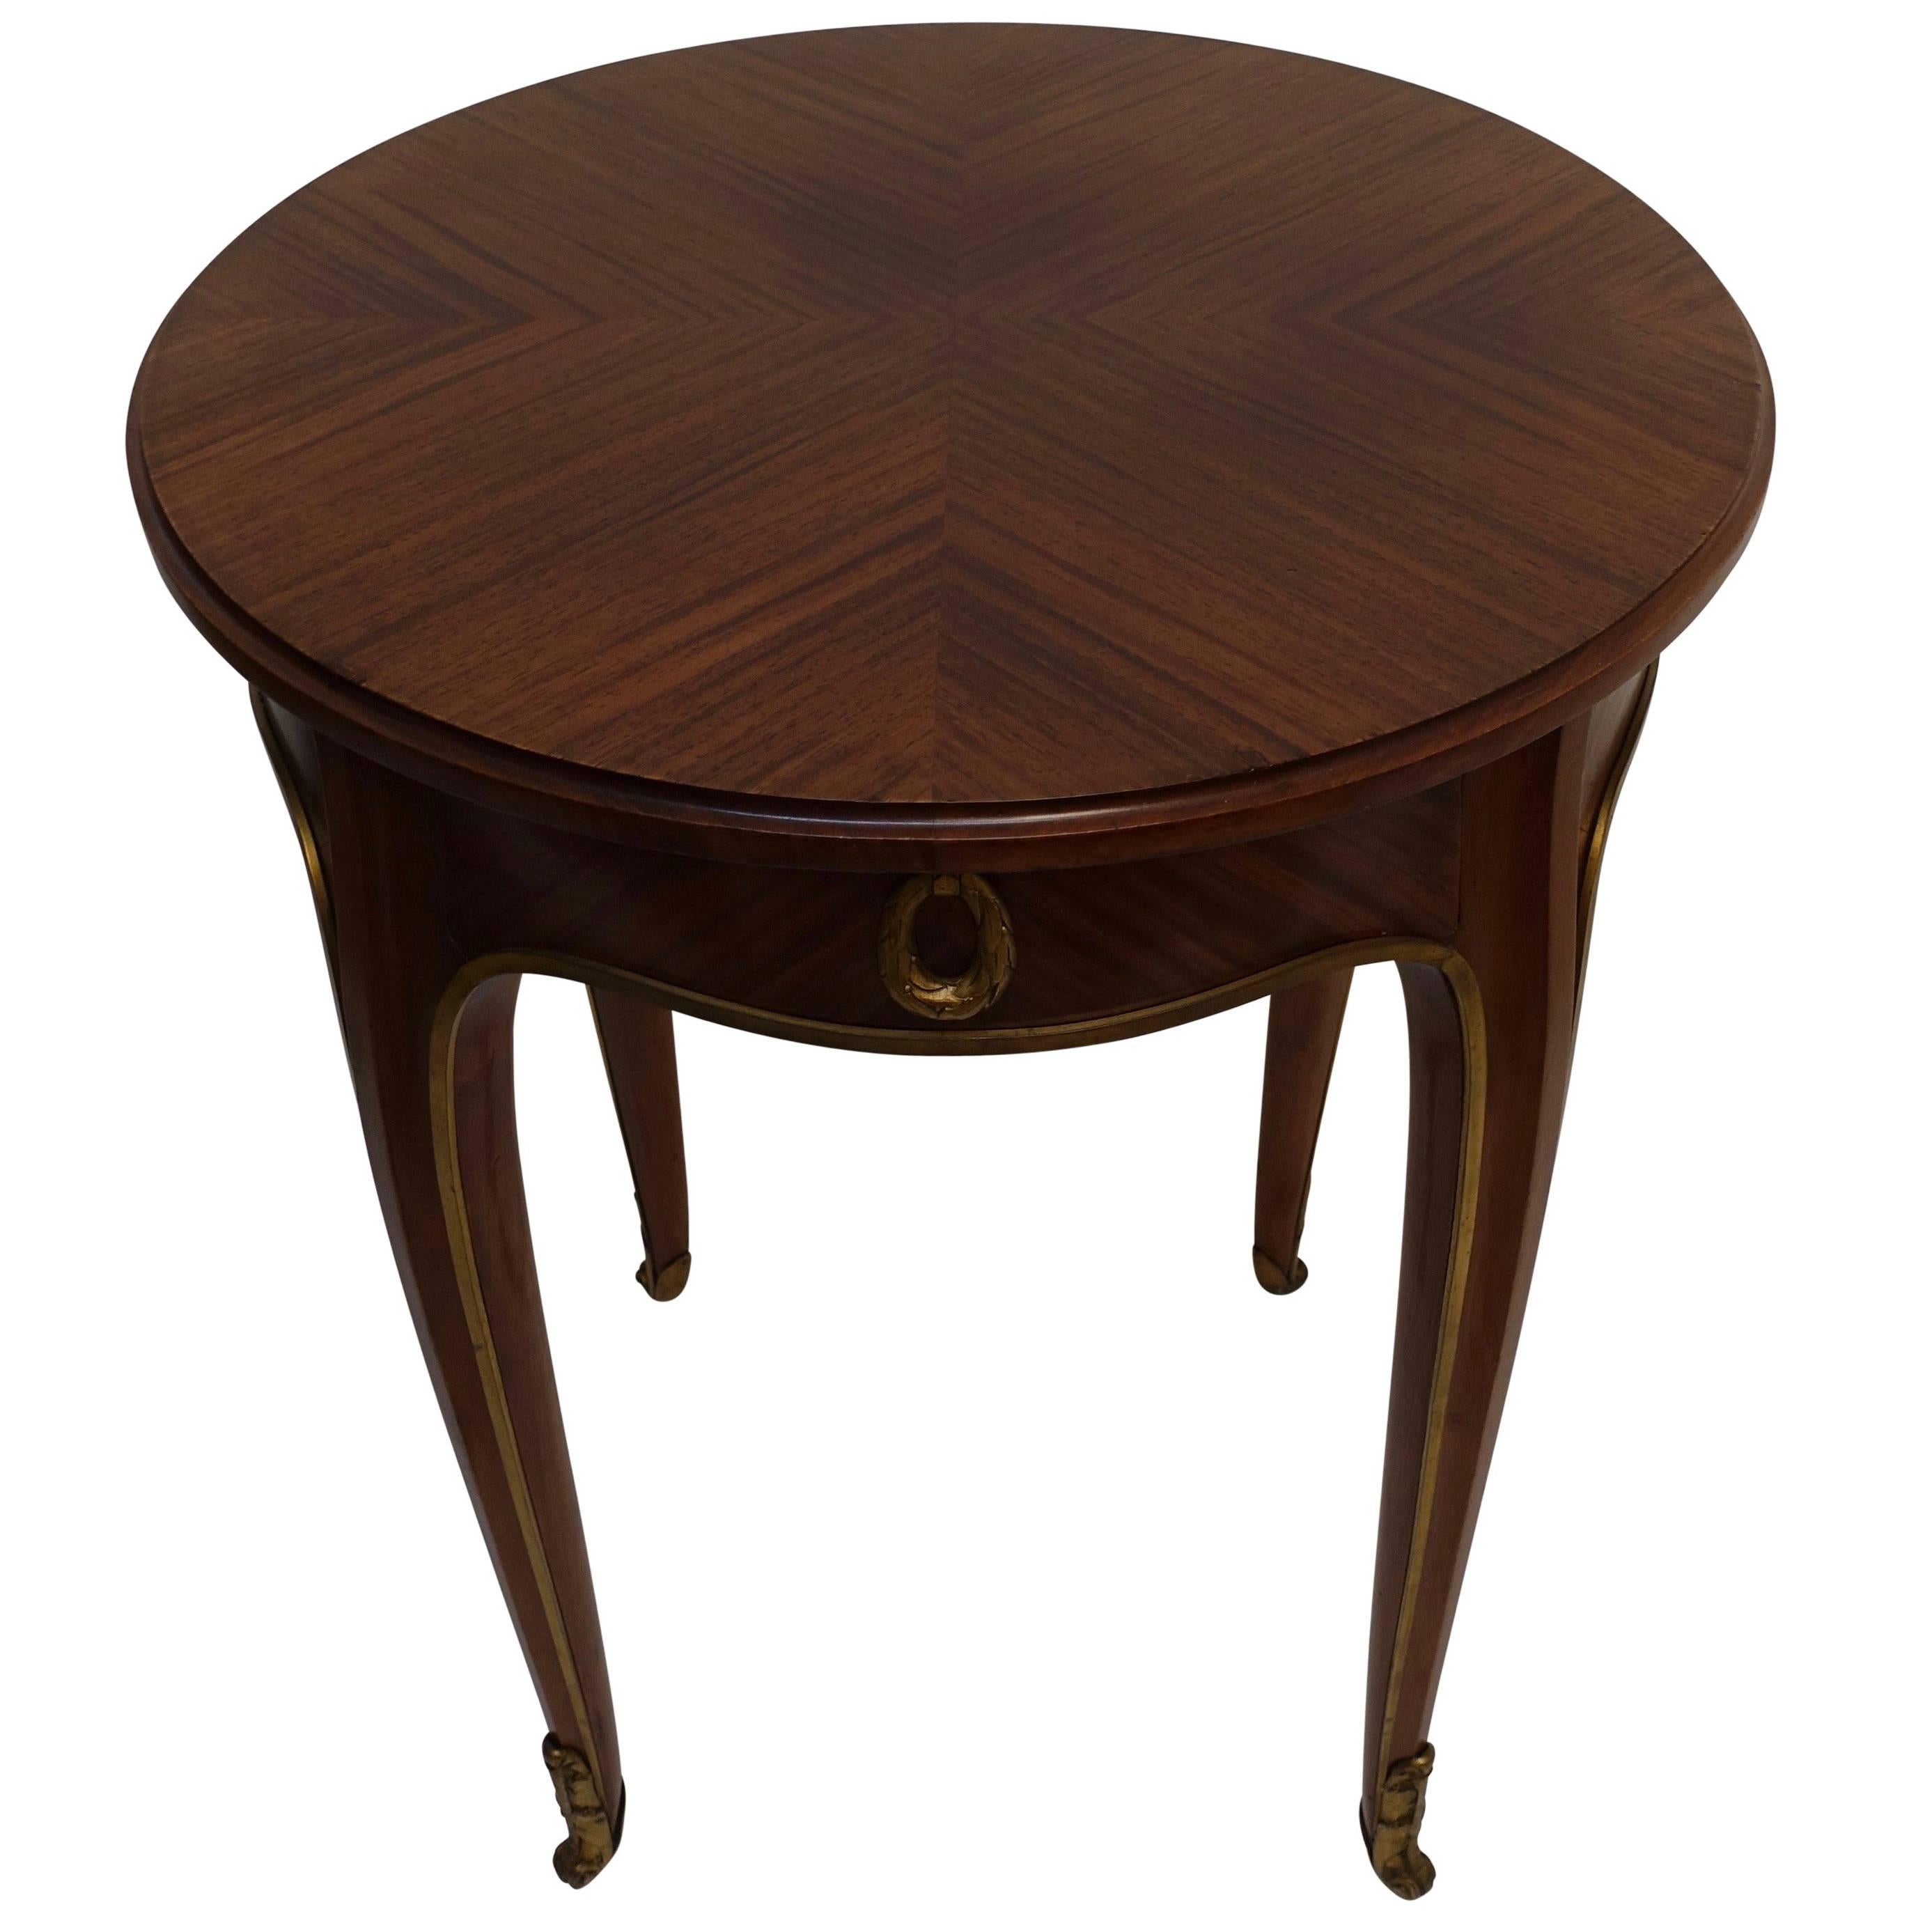 Louis XVI Style Mahogany Side Table with Drawer, French Early 20th century For Sale